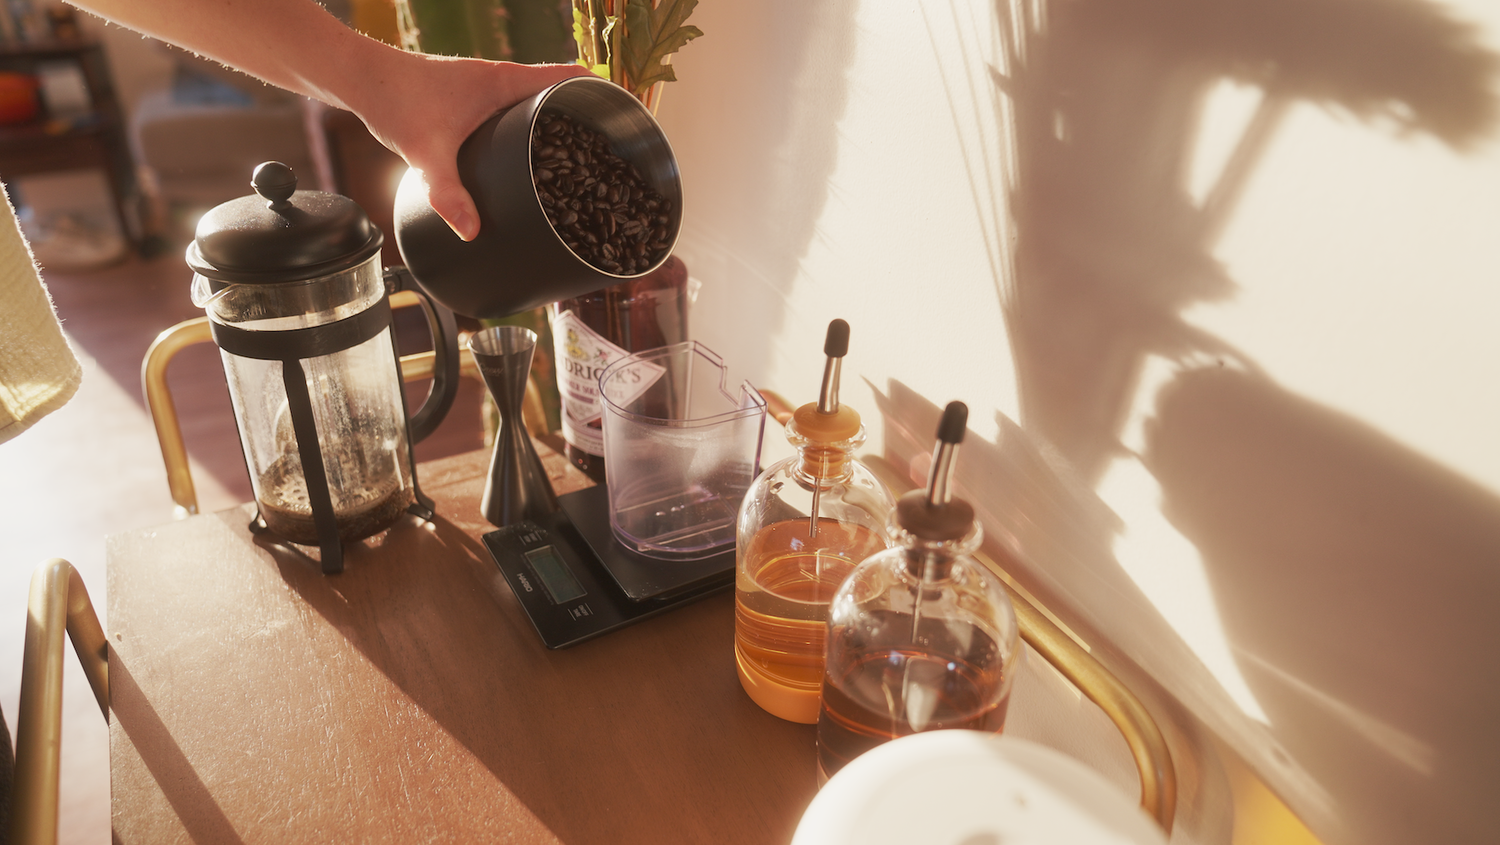 Innovative home barware for crafting simple cocktails, storing syrups and infusing spirits or olive oils from home